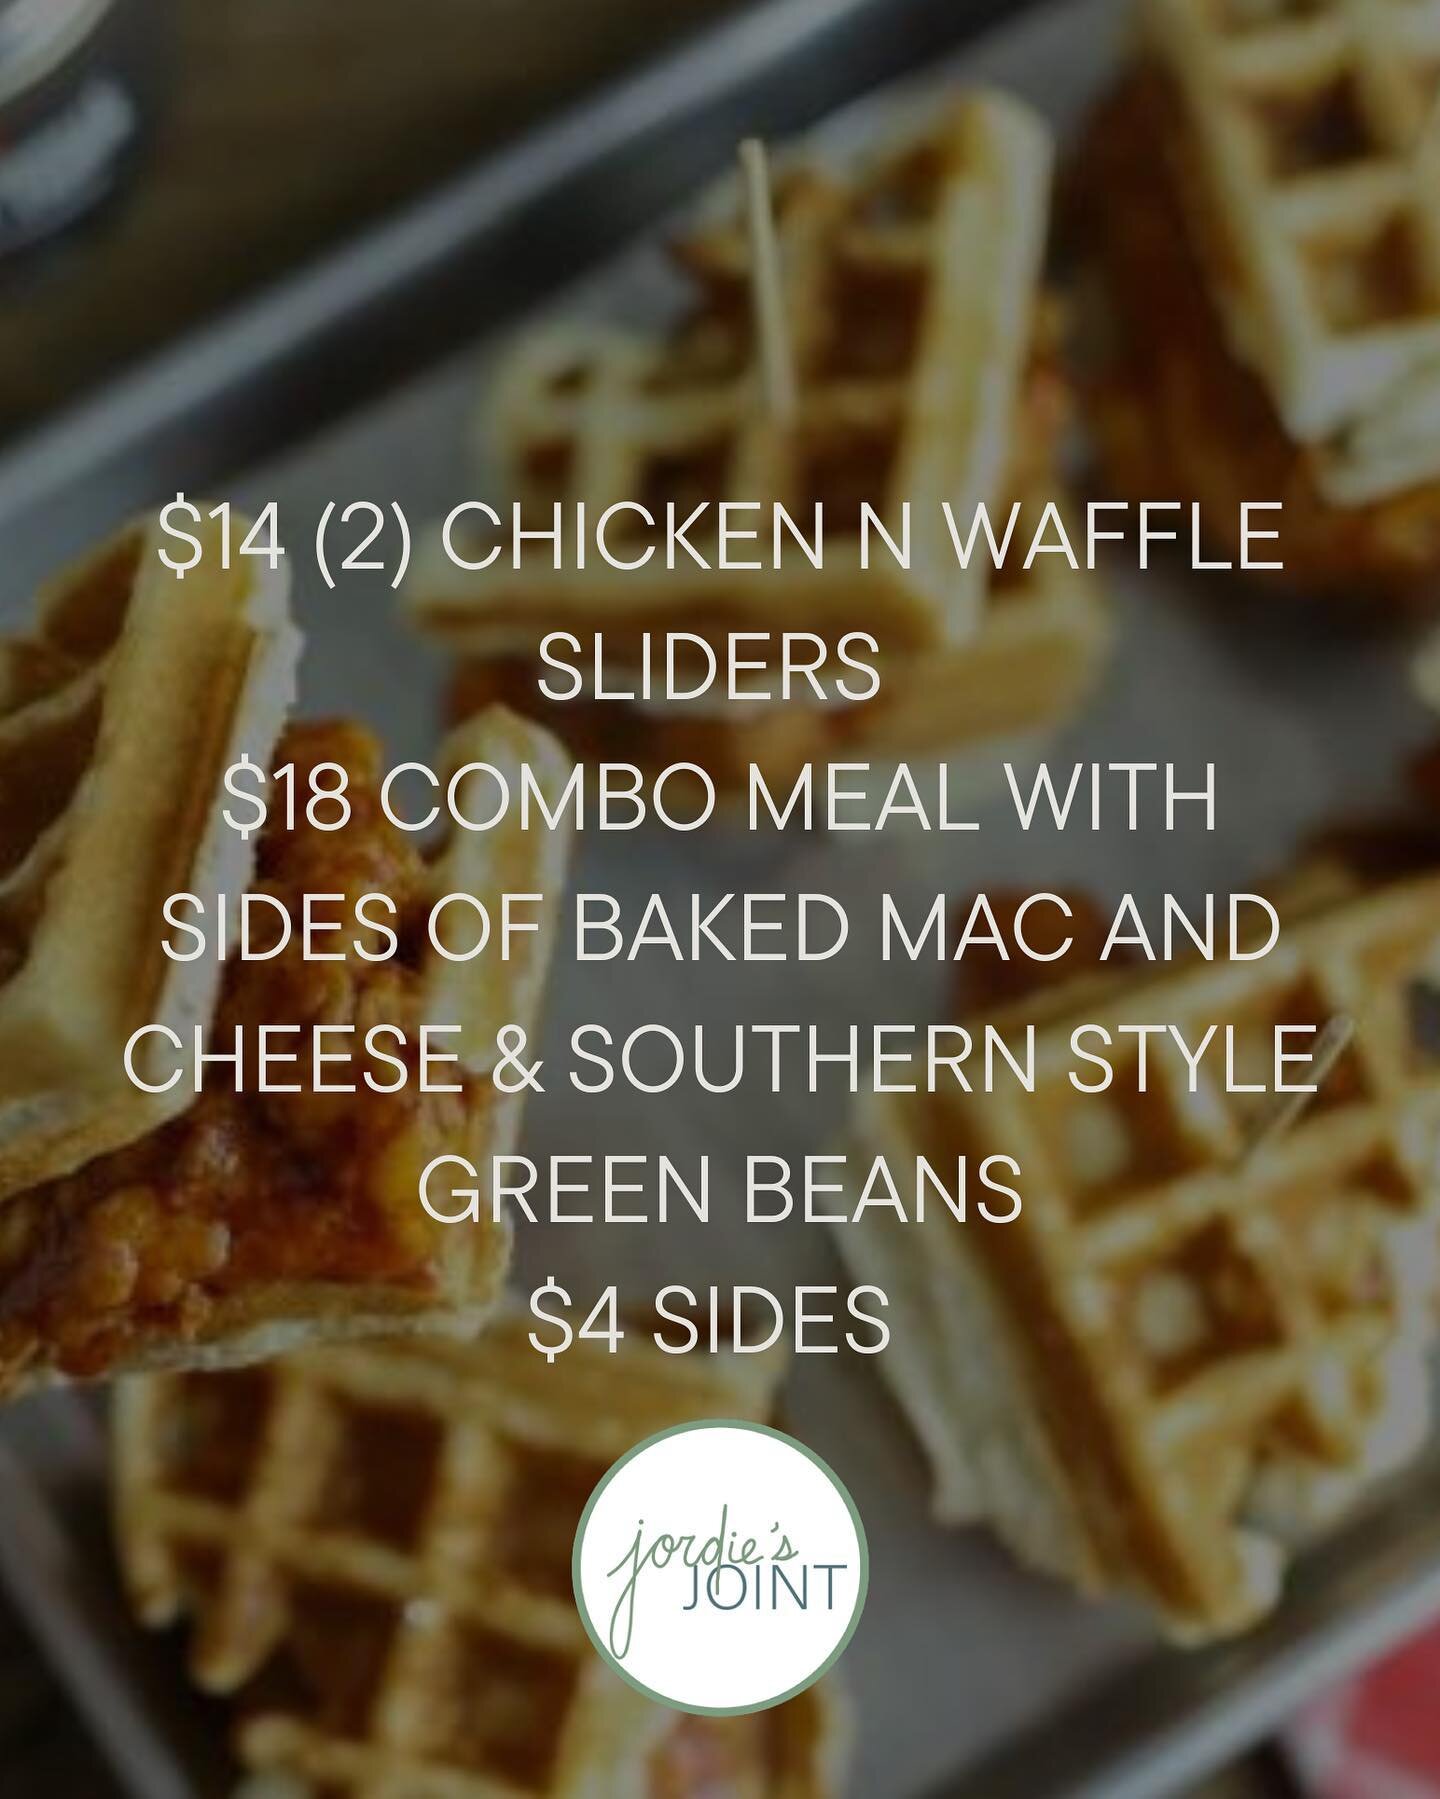 FINALS MEAL!! Want to get some Jordie&rsquo;s Joint before the school year ends? Order on our website now for pickup tomorrow evening! Available during Fryft Hours (5-7pm). Delicious Buttermilk Chicken and Waffle sliders brushed with a sweat heat syr